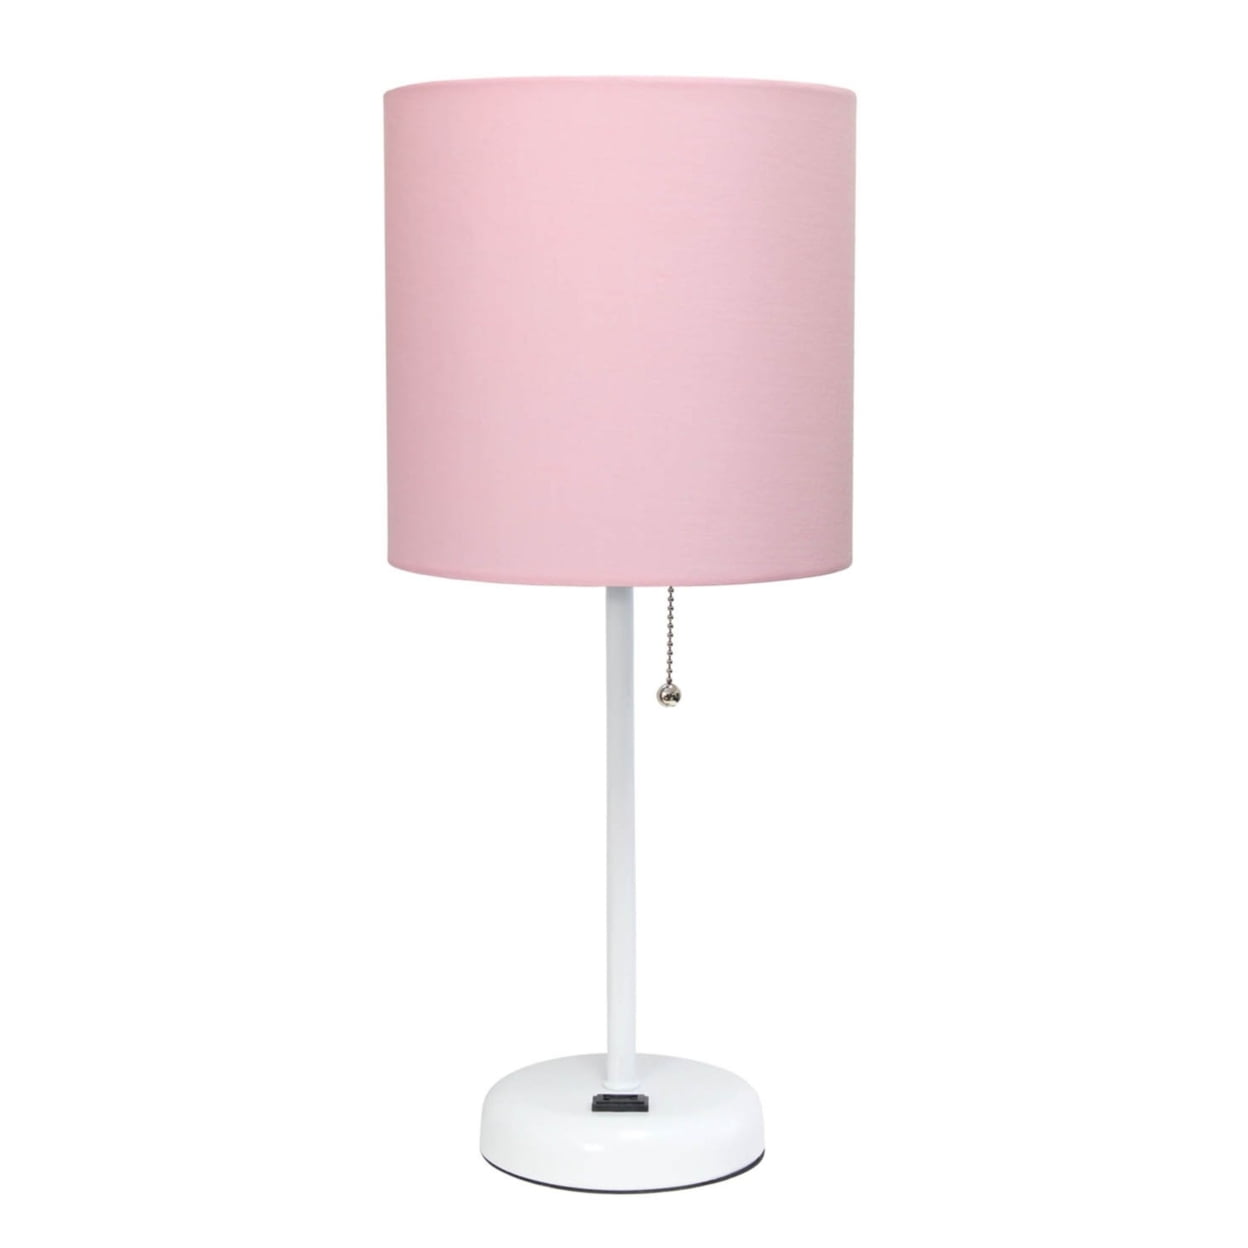 Lt2024-pow White Stick Table Lamp With Charging Outlet & Fabric Shade, Pink